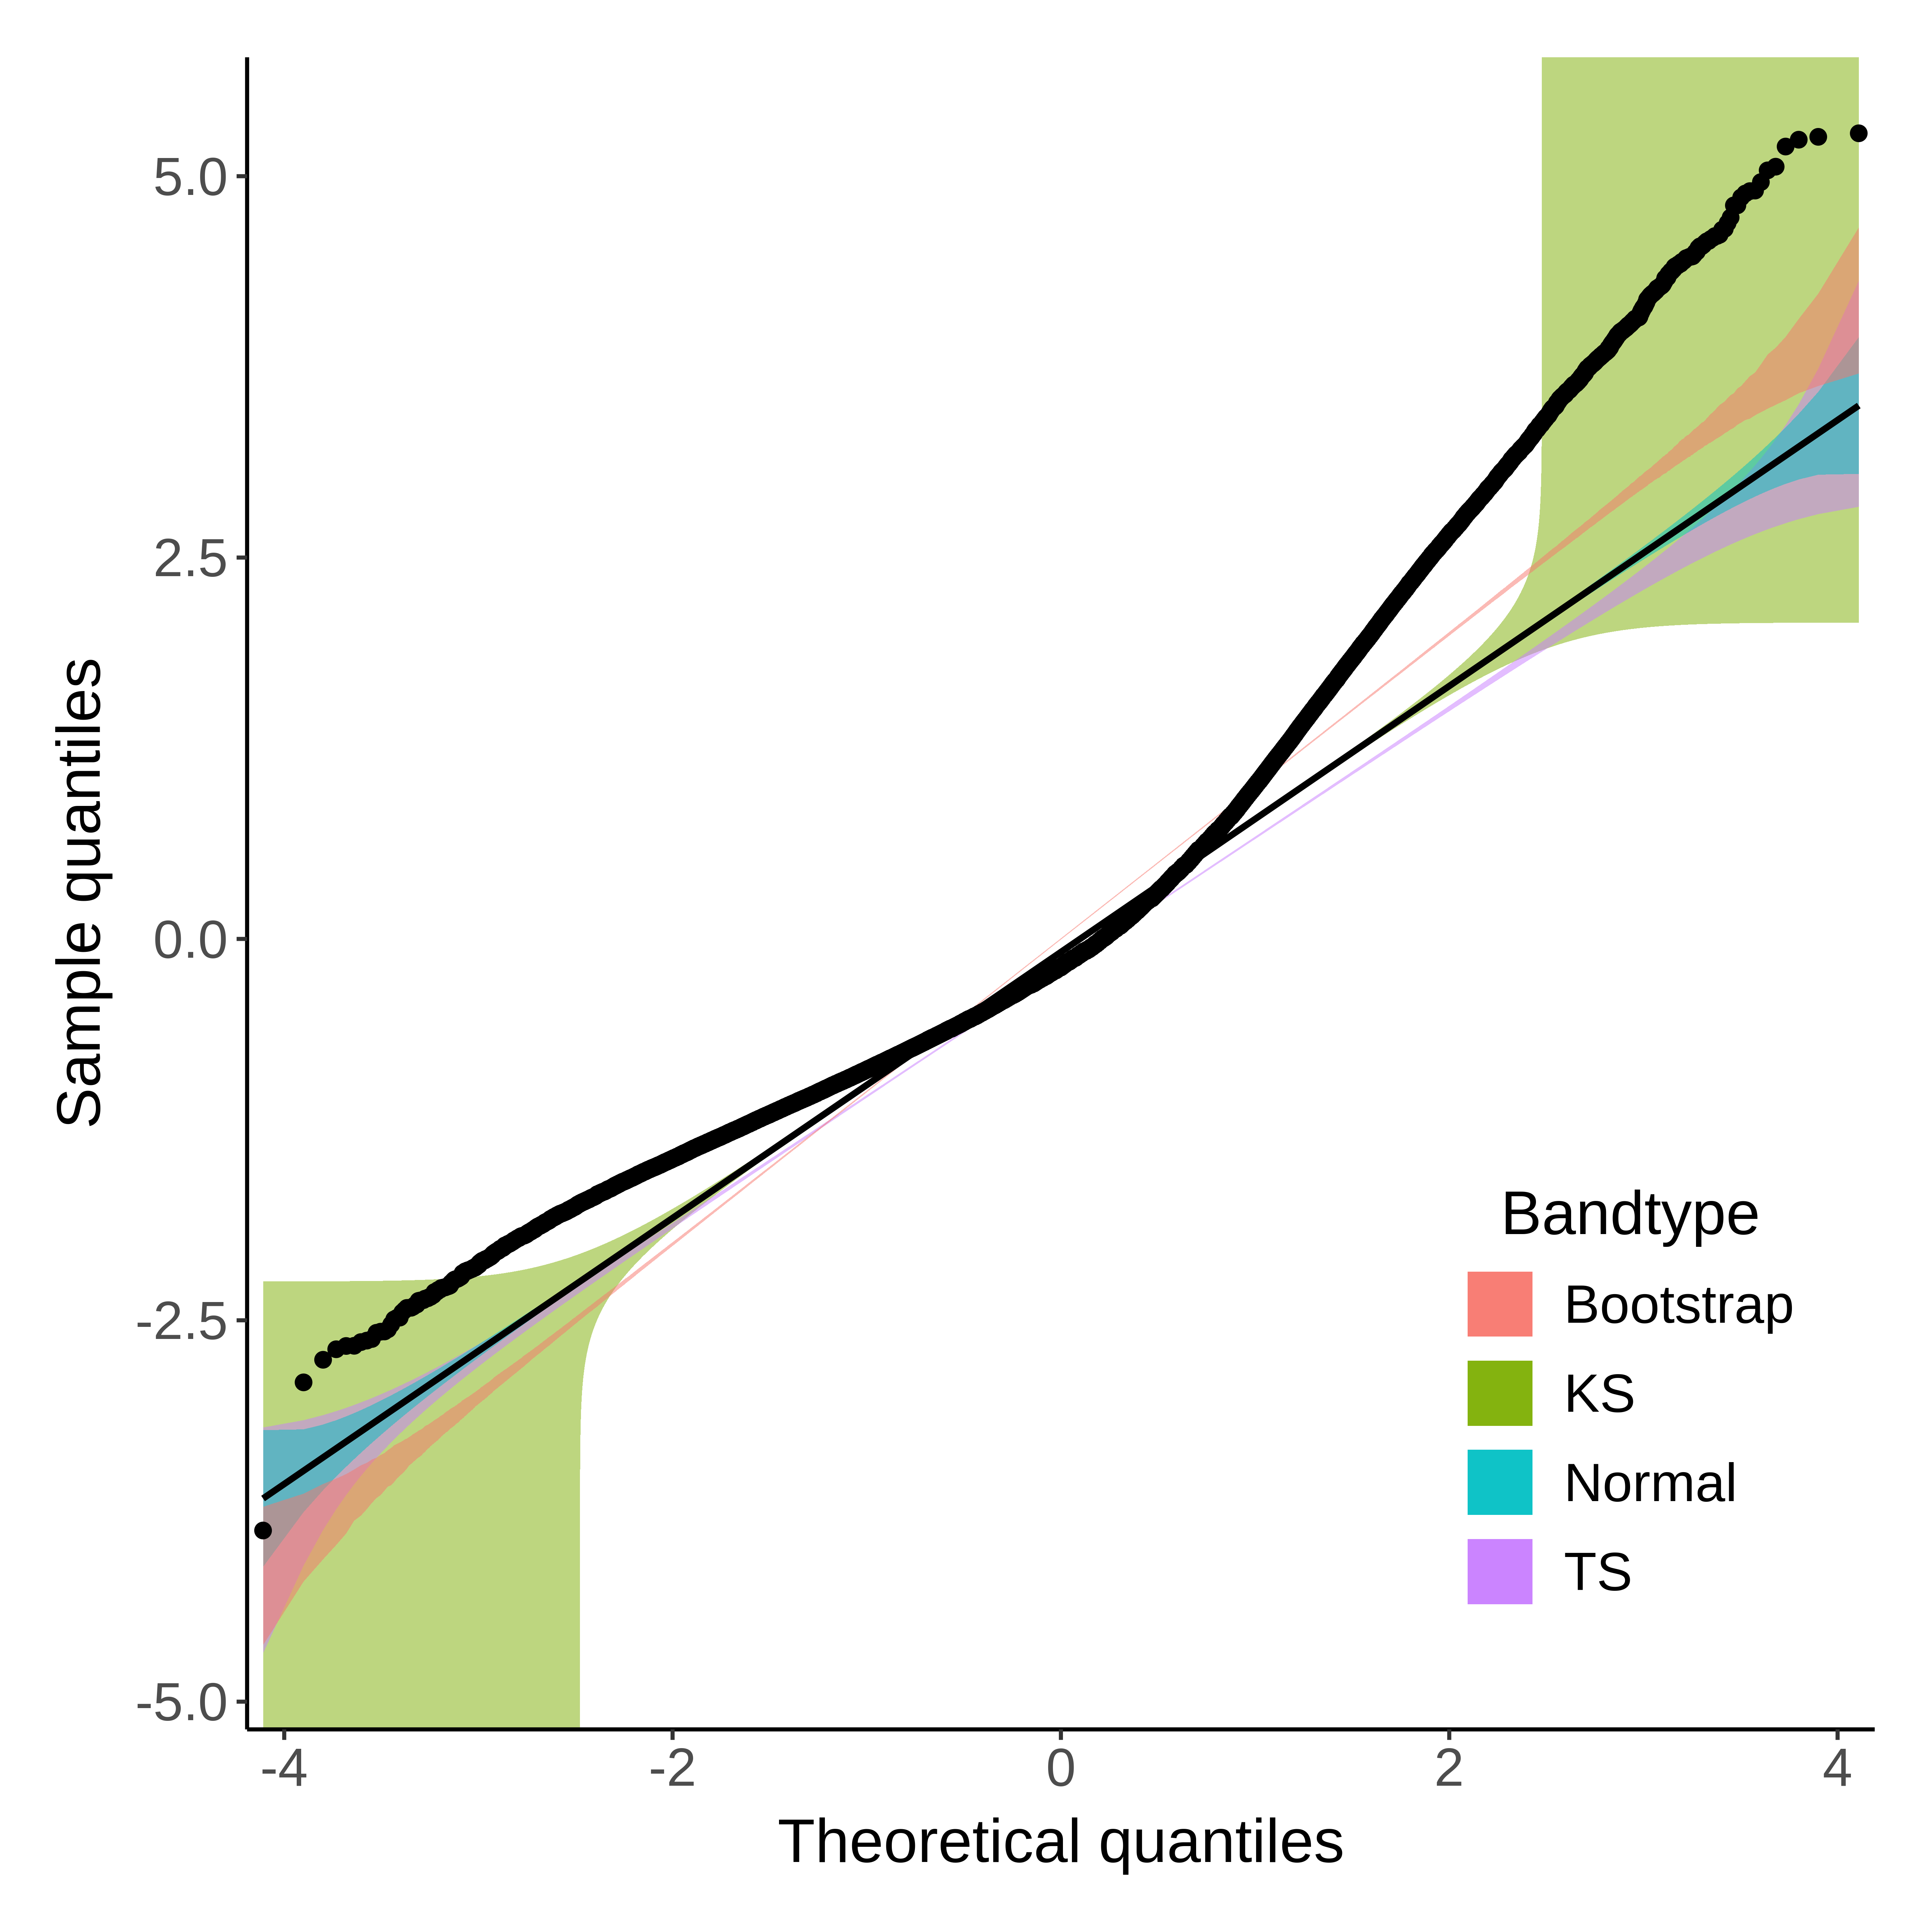 Residuals of the linear mixed-effects model from the semantic decision study. \linebreak KS = Kolmogorov-Smirnov test; TS = tail-sensitive confidence bands.